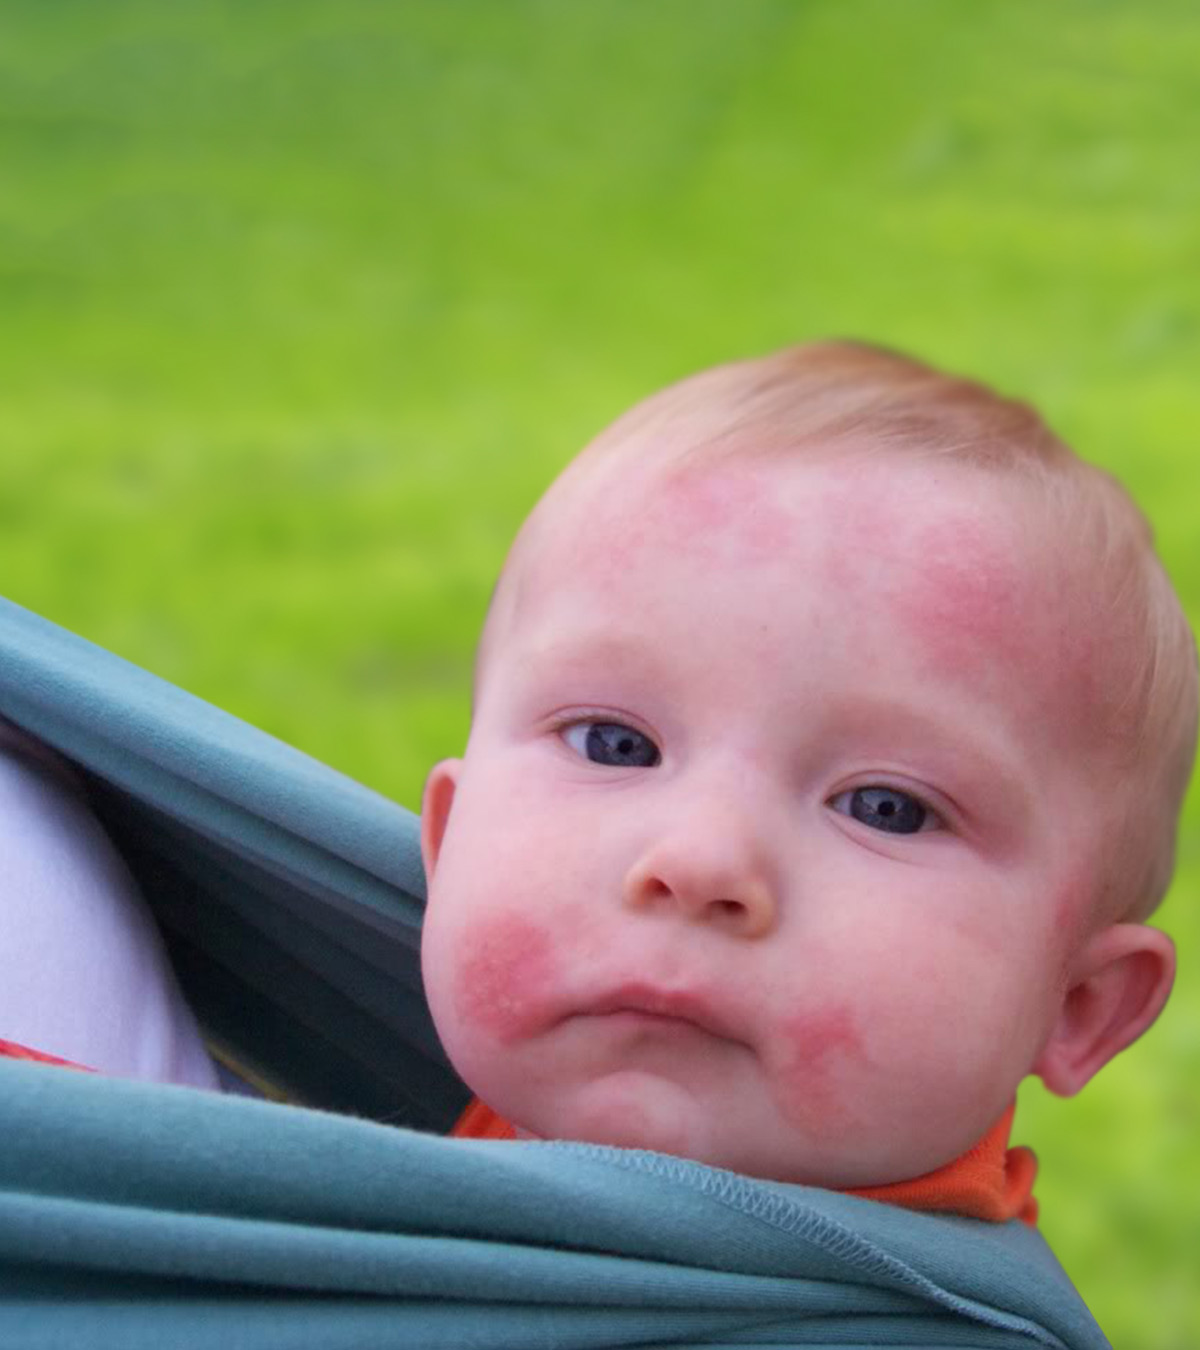 4 Causes Of Ringworm In Babies, Symptoms, And Treatment